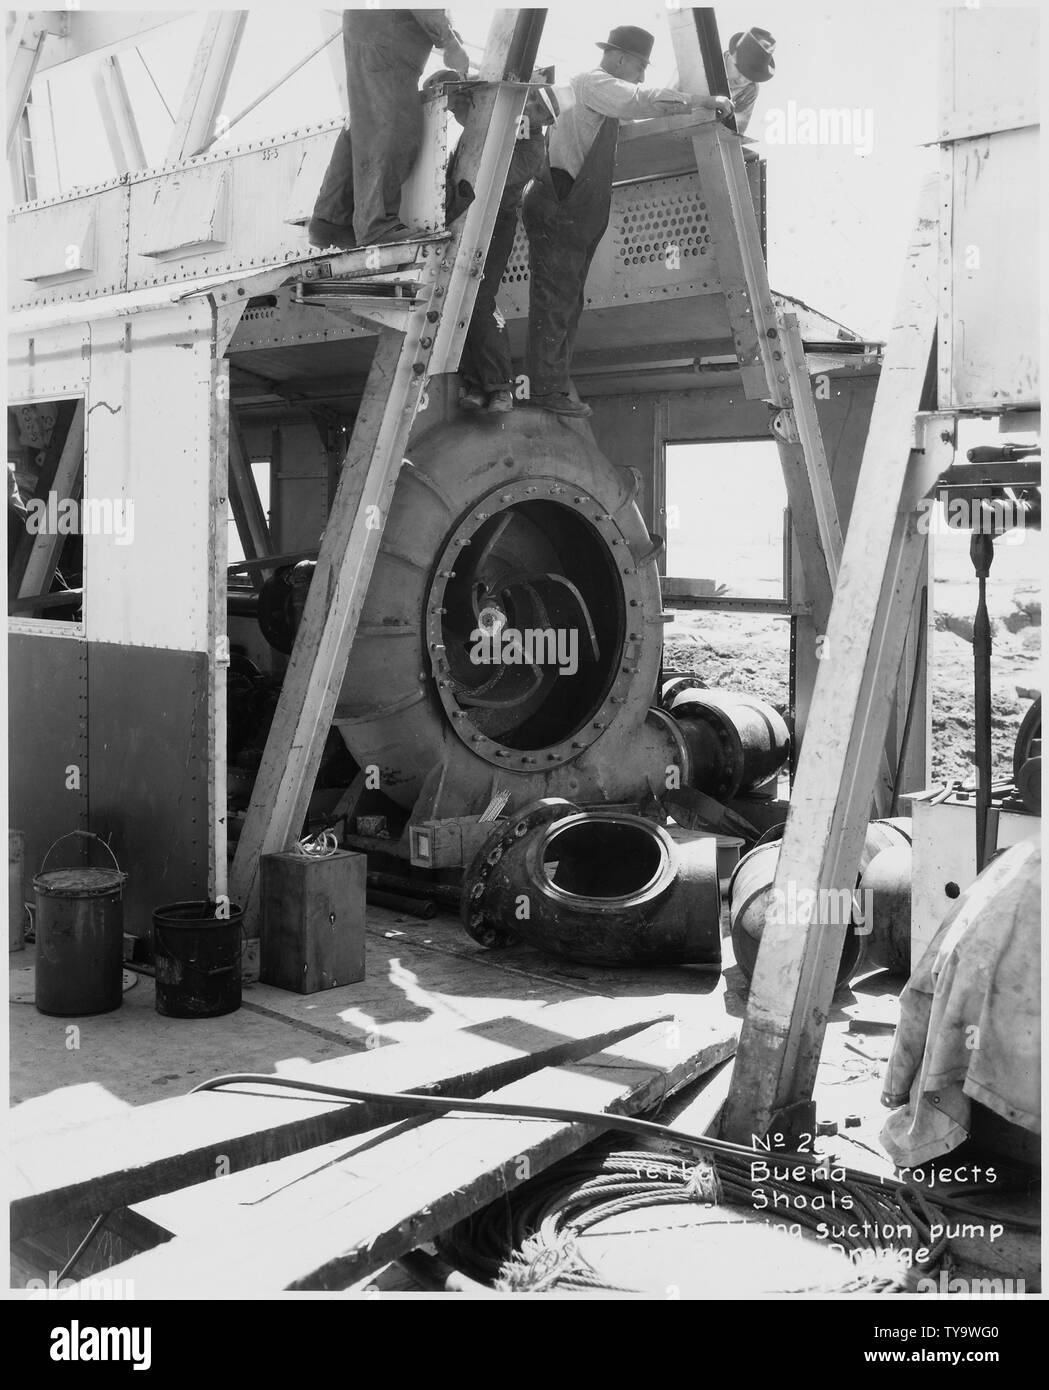 No. 291 Yerba Buena Shoals Projects Assemblying Suction Pump for Protable Dredge Stock Photo